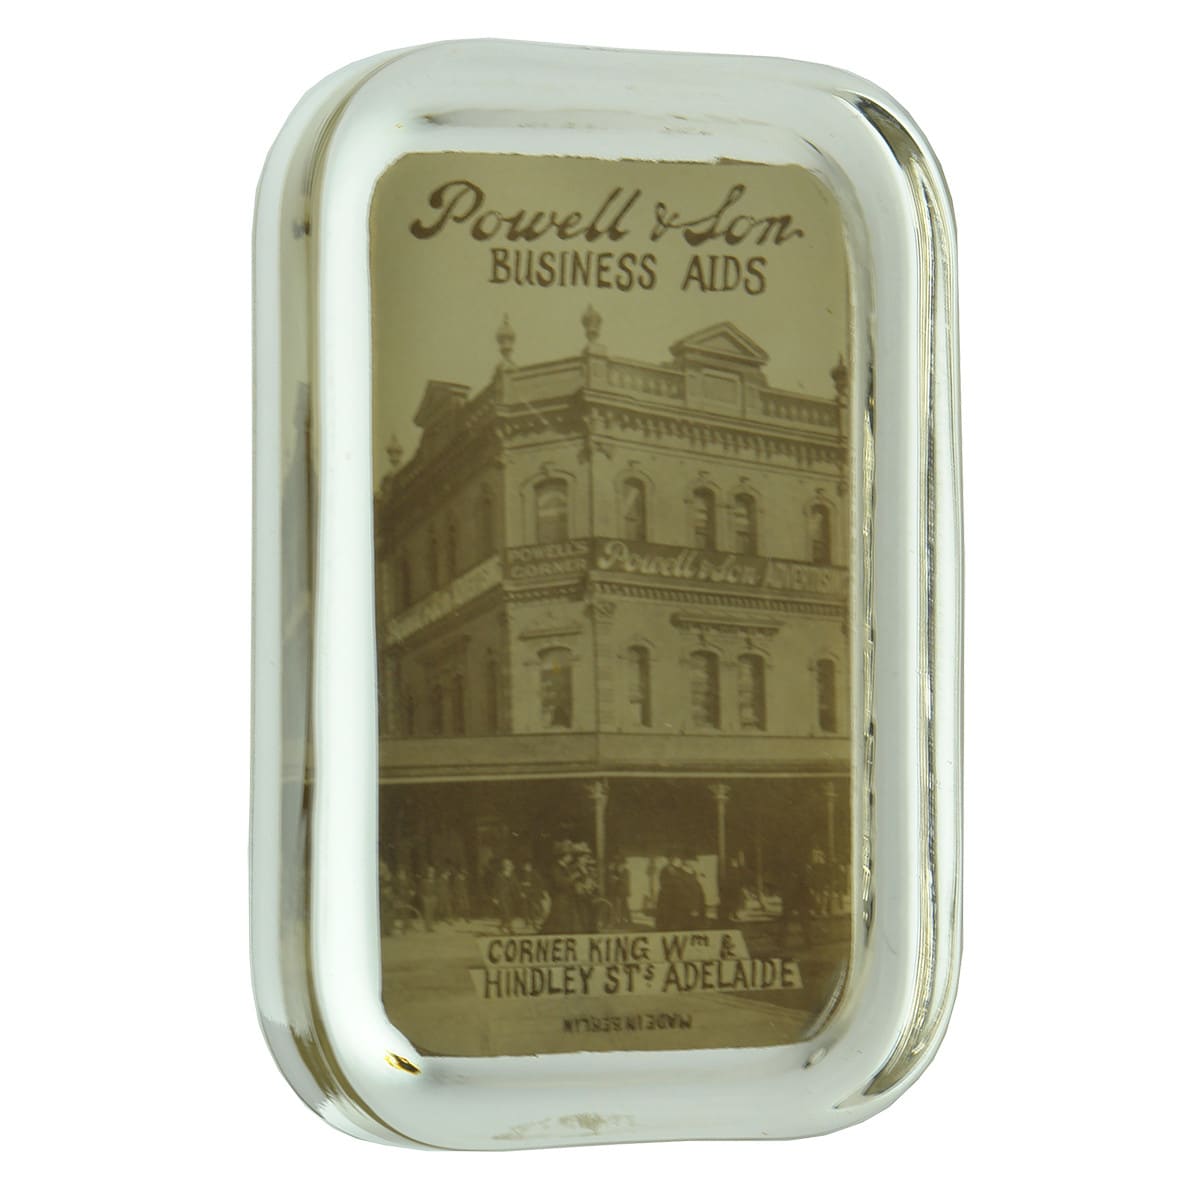 Paperweight. Powell & Son Business Aids, Corner King Wm & Hindley Sts, Adelaide. (South Australia)